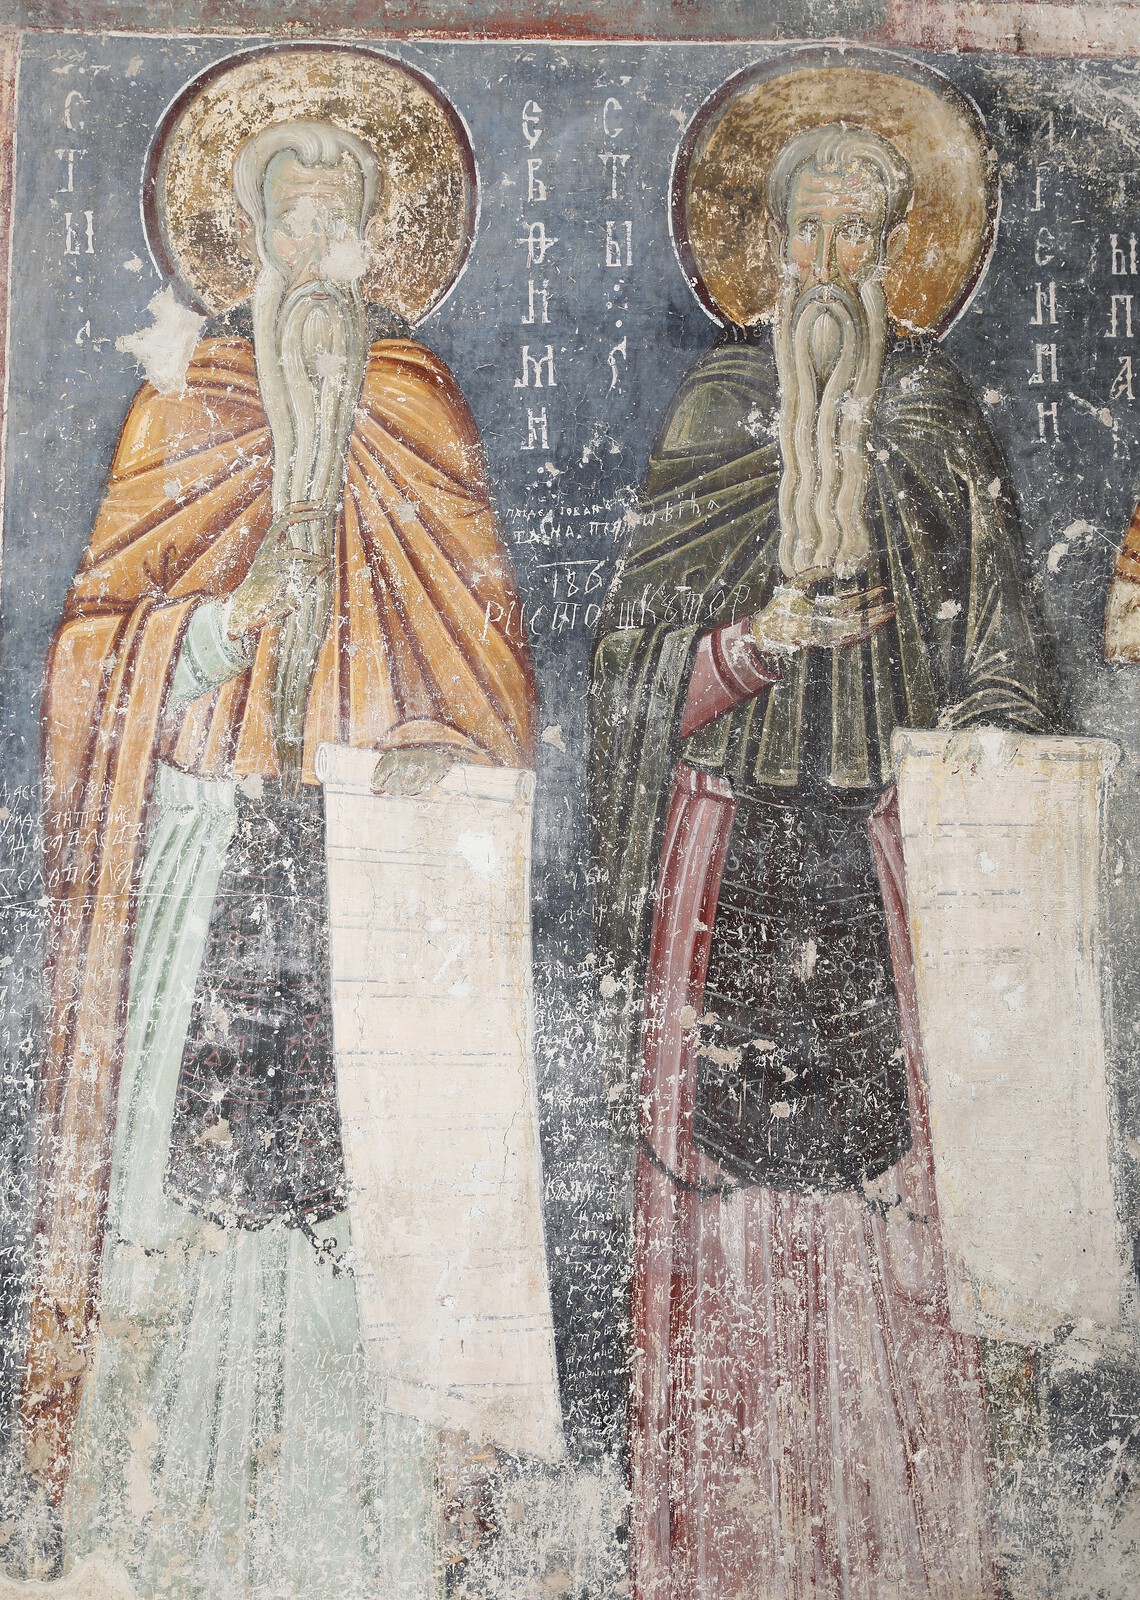 Sts. Euthymius and Arsenius, detail